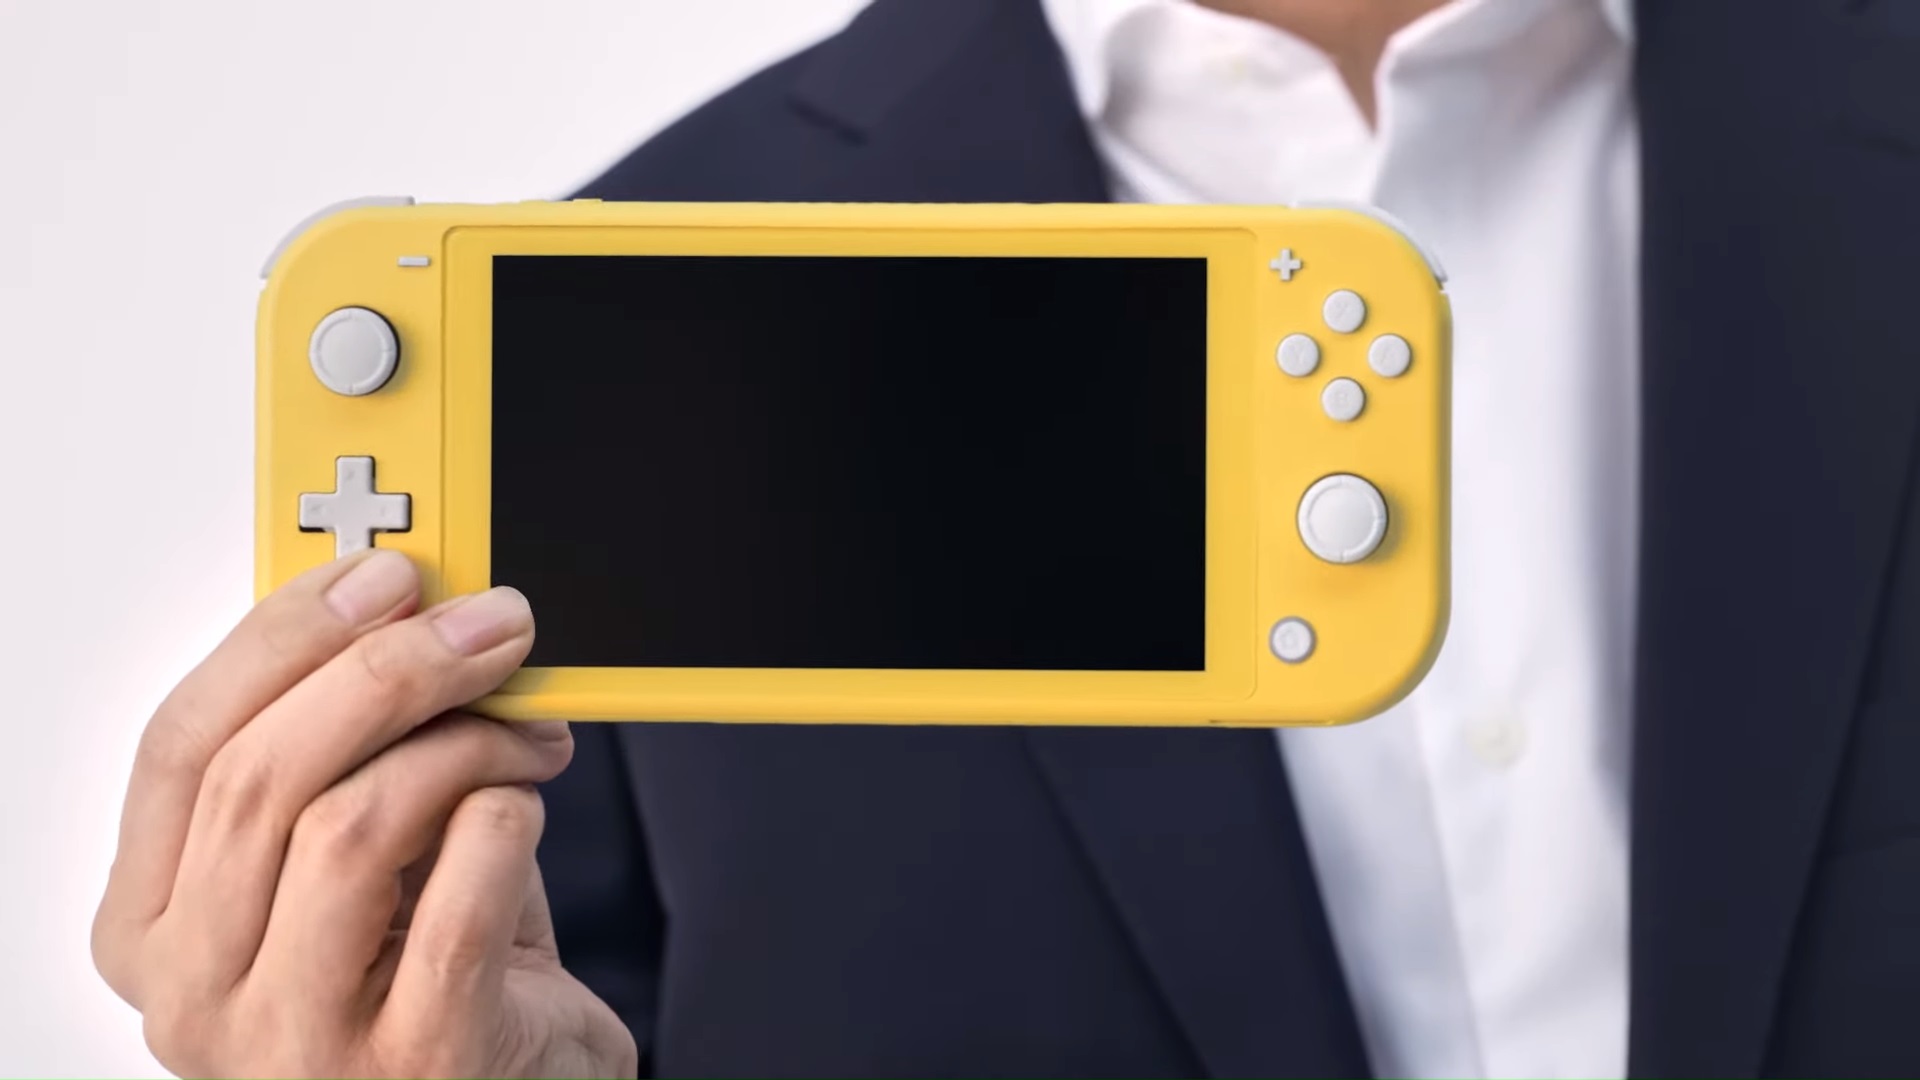 is nintendo coming out with a new switch